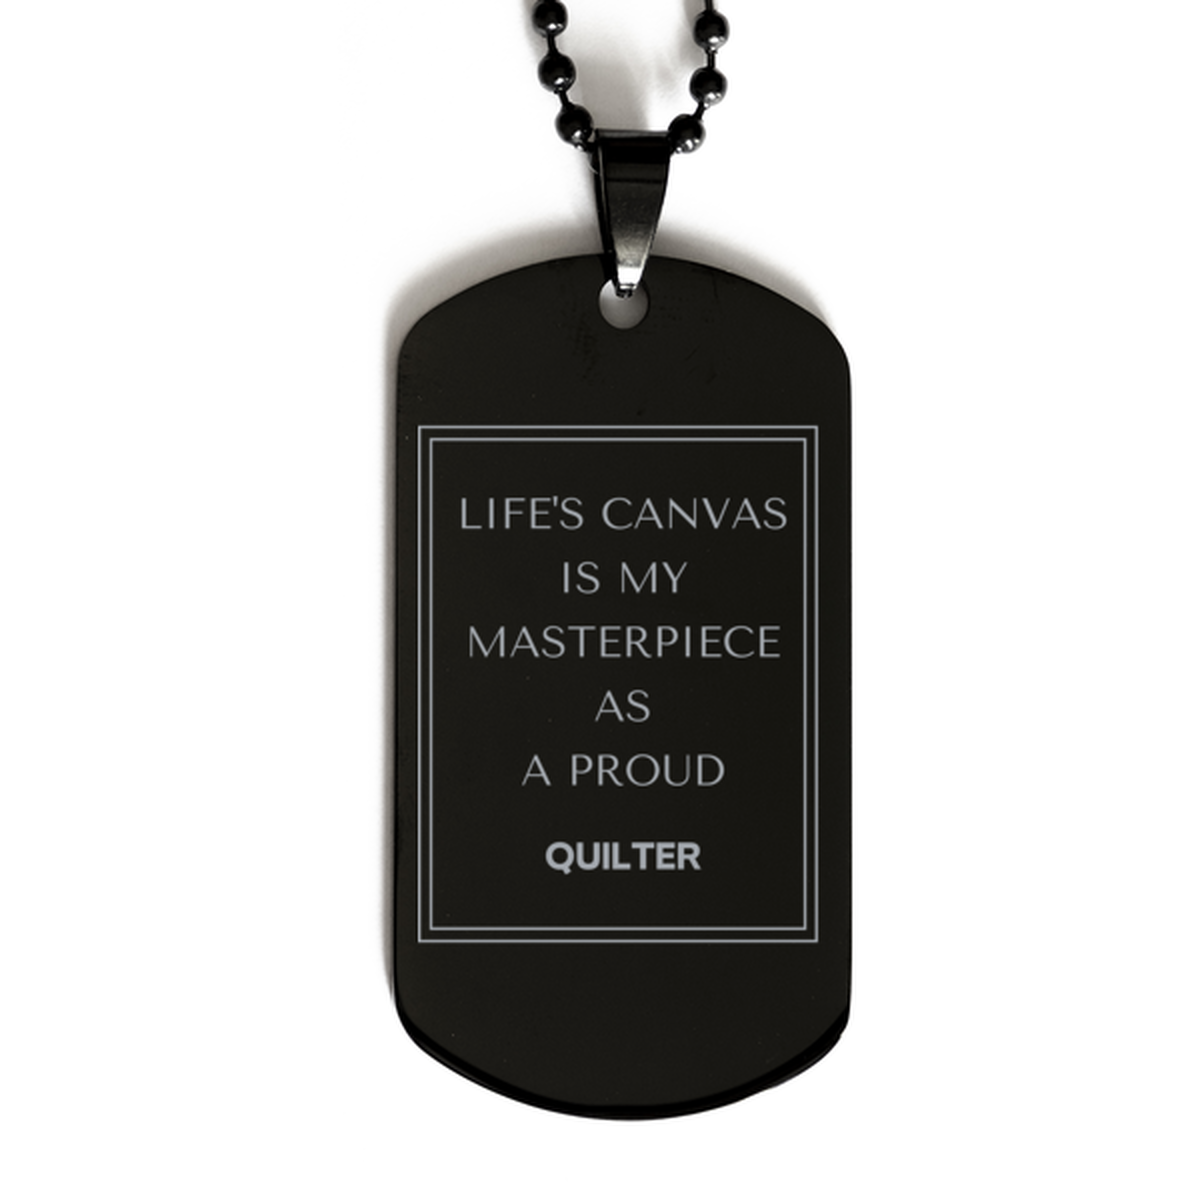 Proud Quilter Gifts, Life's canvas is my masterpiece, Epic Birthday Christmas Unique Black Dog Tag For Quilter, Coworkers, Men, Women, Friends